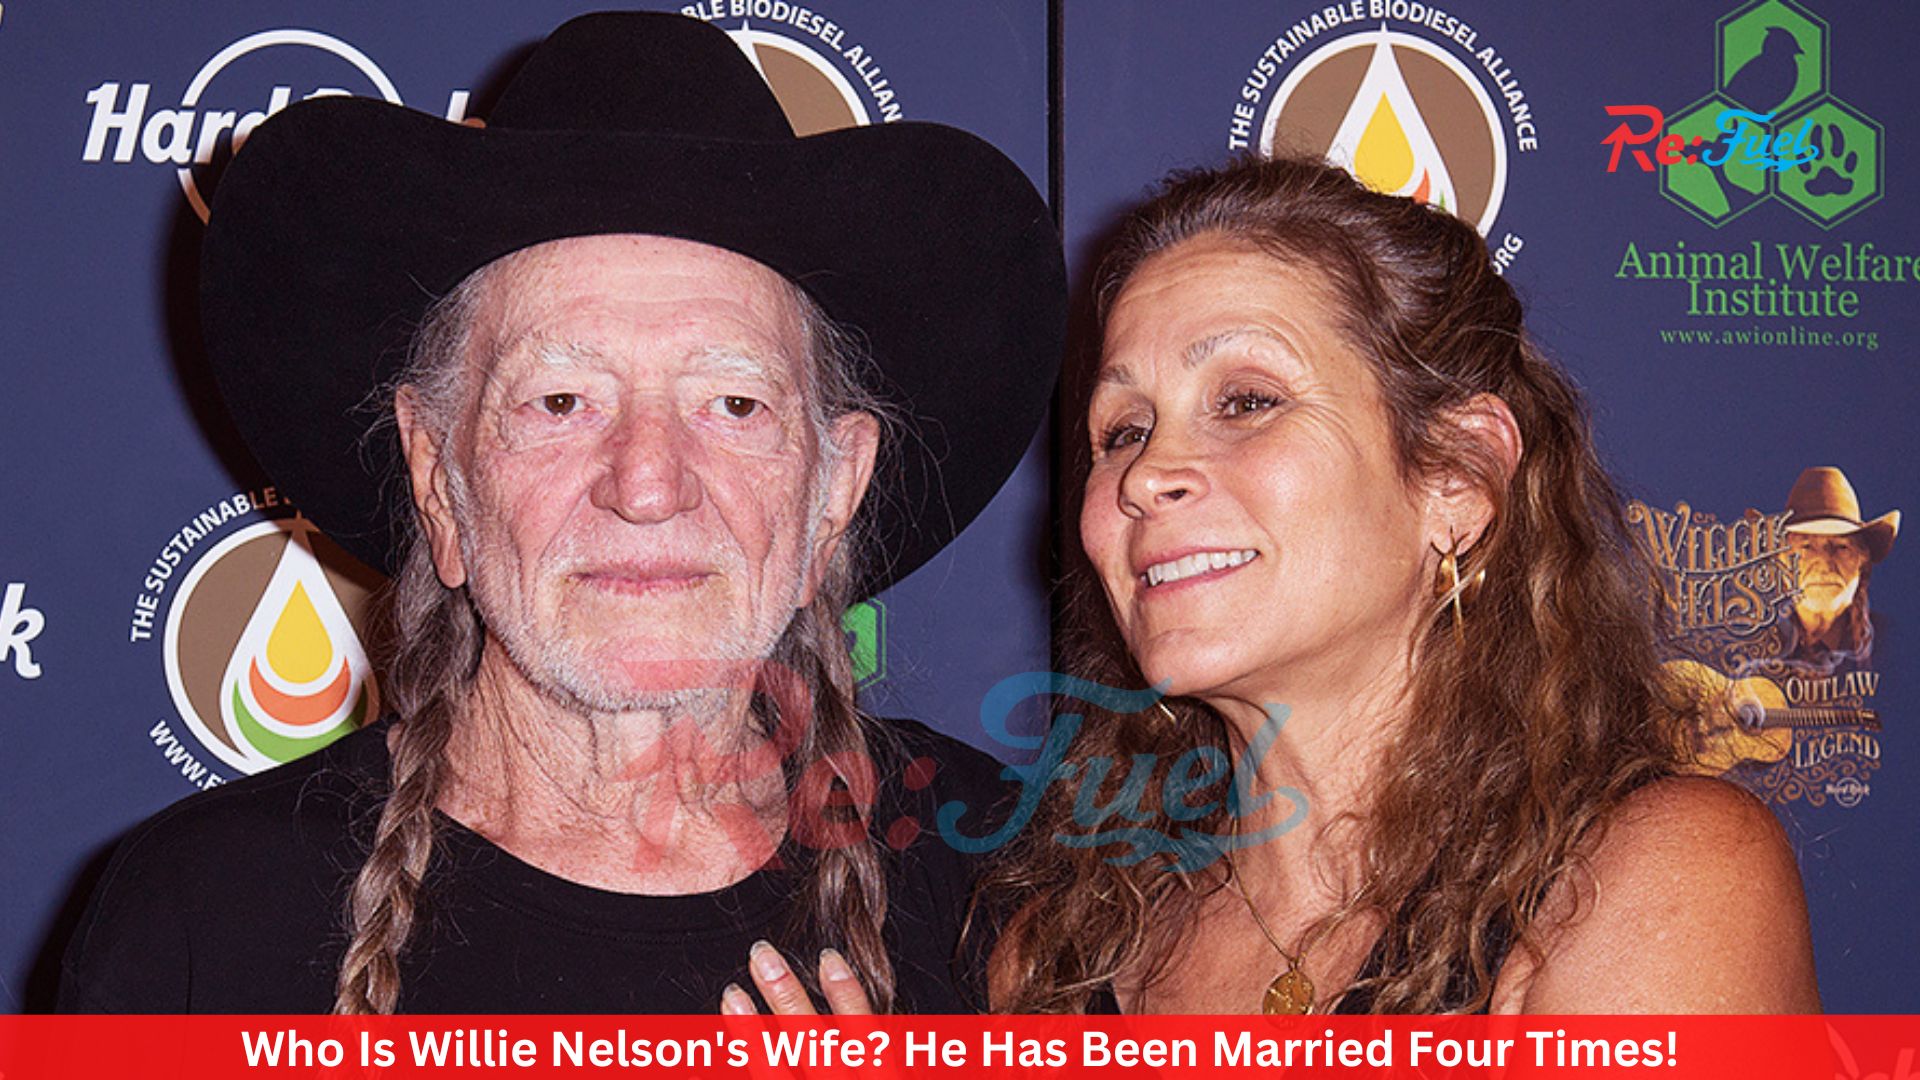 Who Is Willie Nelson's Wife? He Has Been Married Four Times!